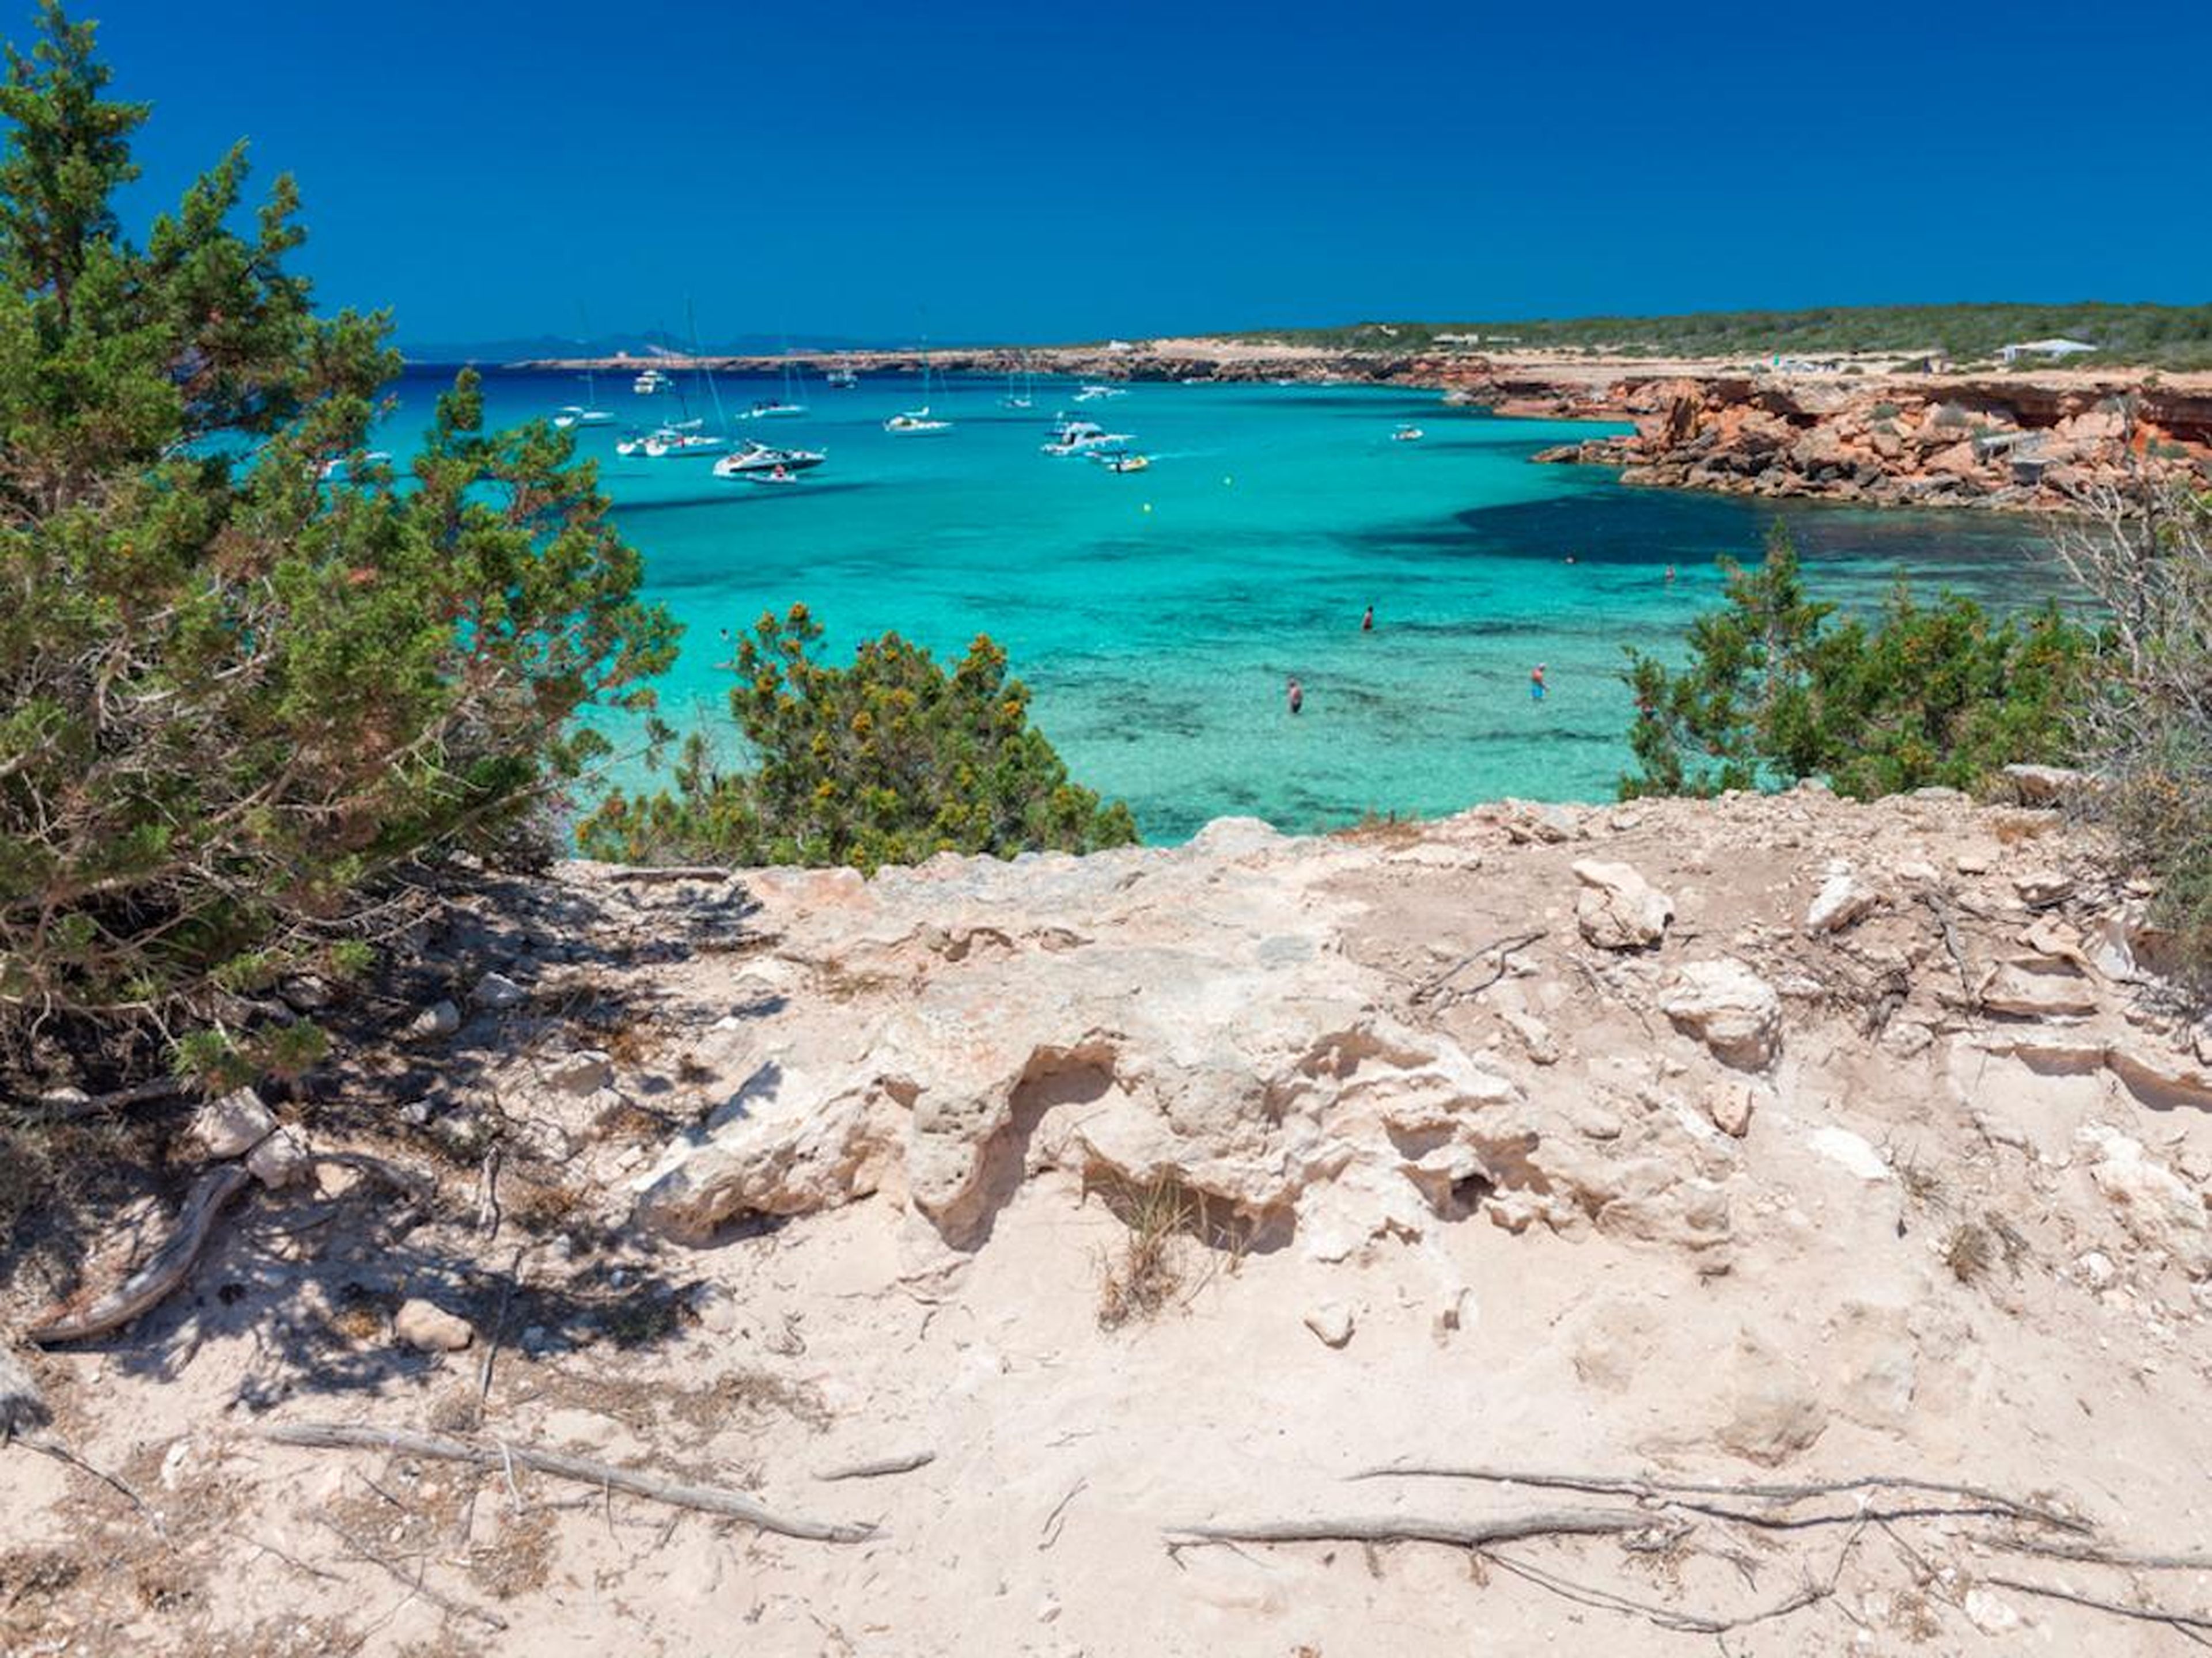 The main day trip near Ibiza is the beautiful island of Formentera, which has spectacular nature, diving, and wildlife.